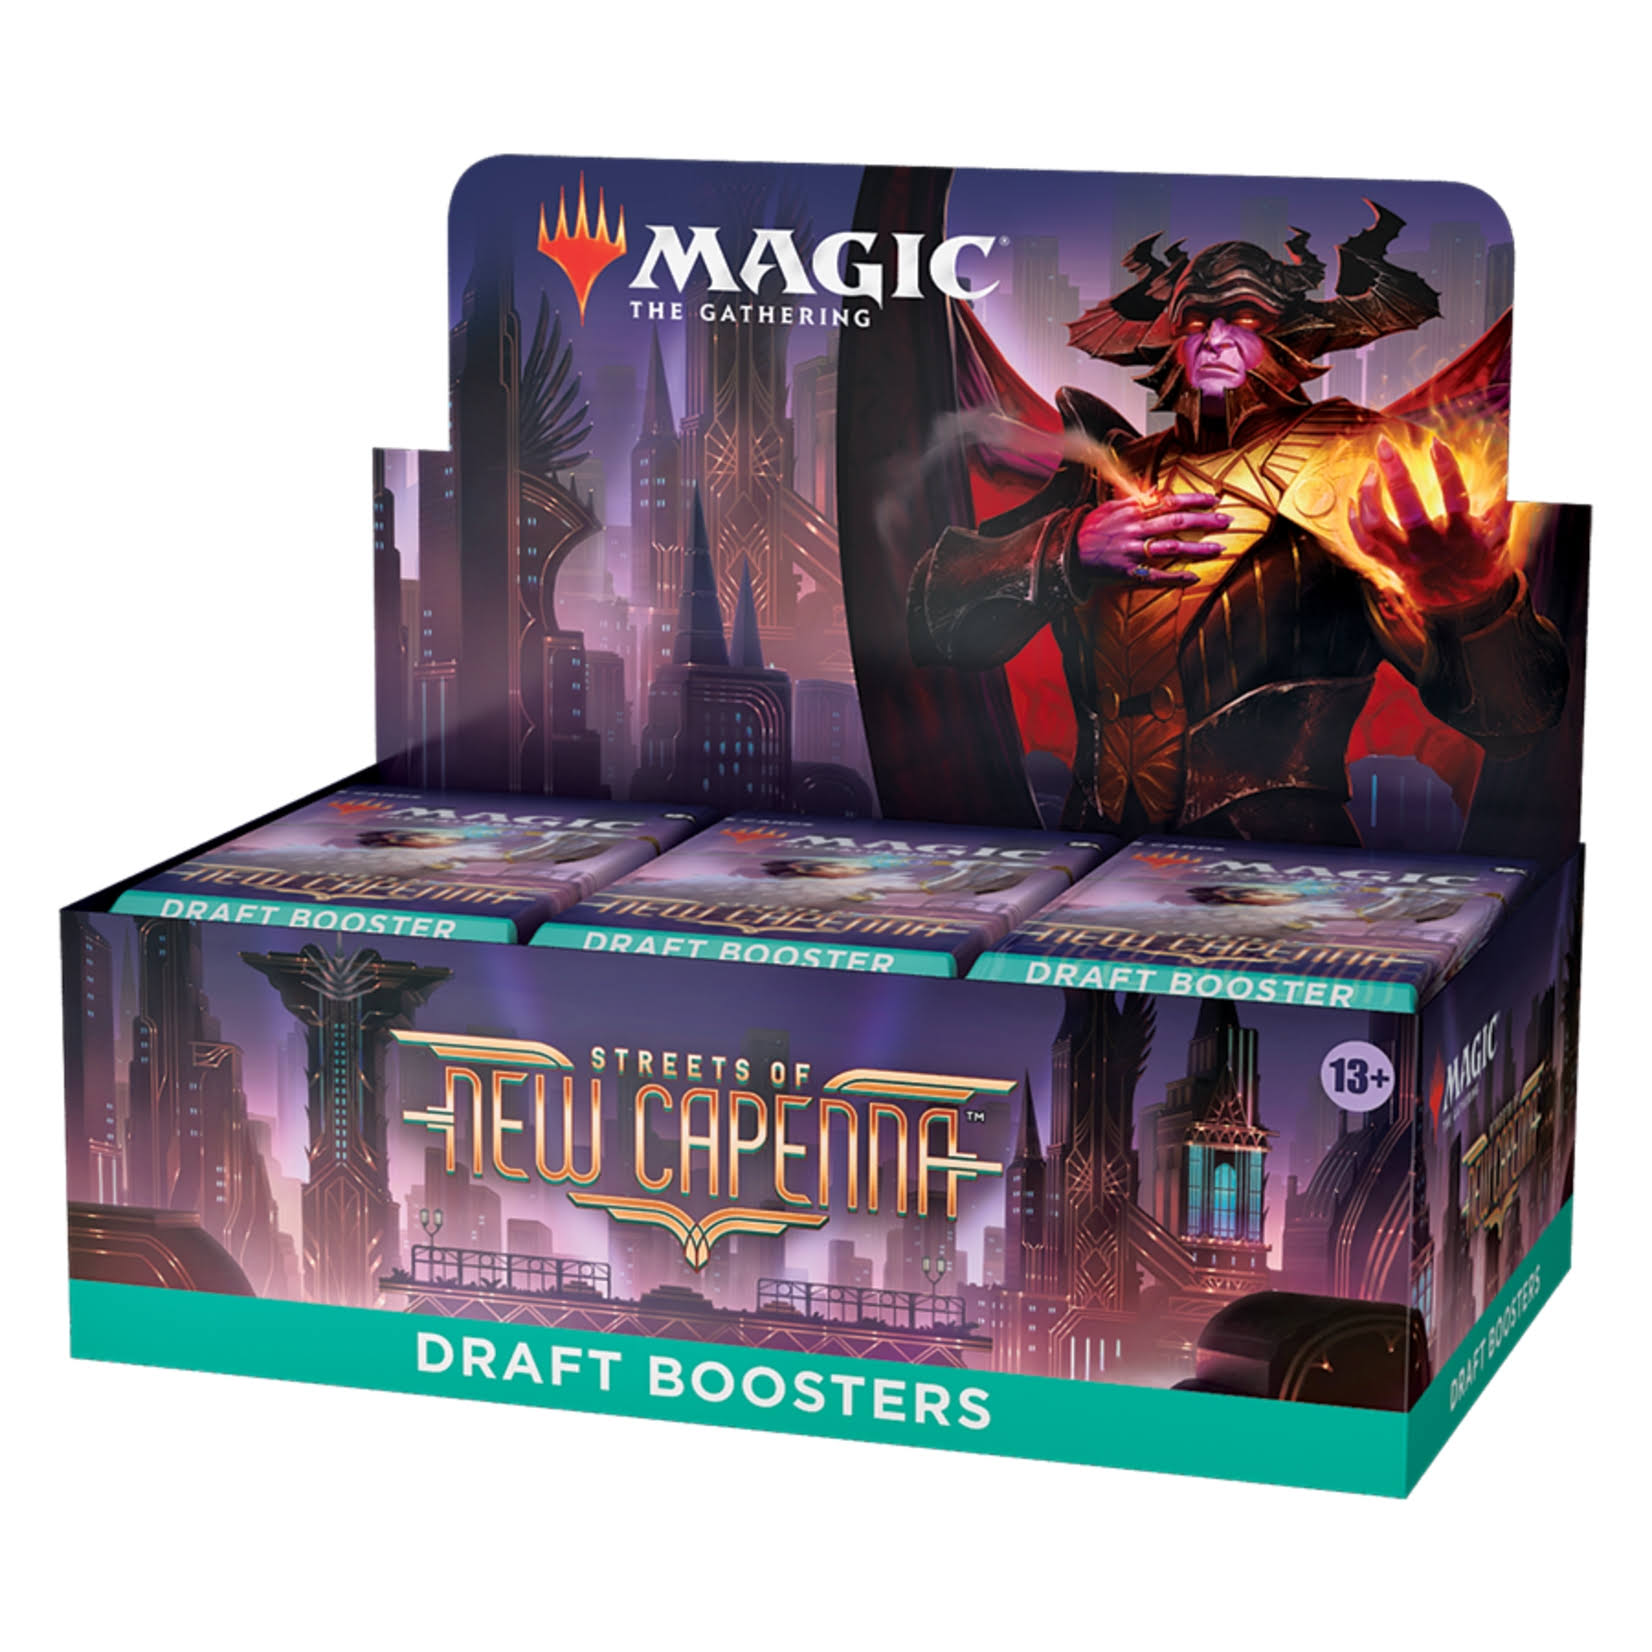 Magic The Gathering - Streets of New Capenna - Draft Booster Box